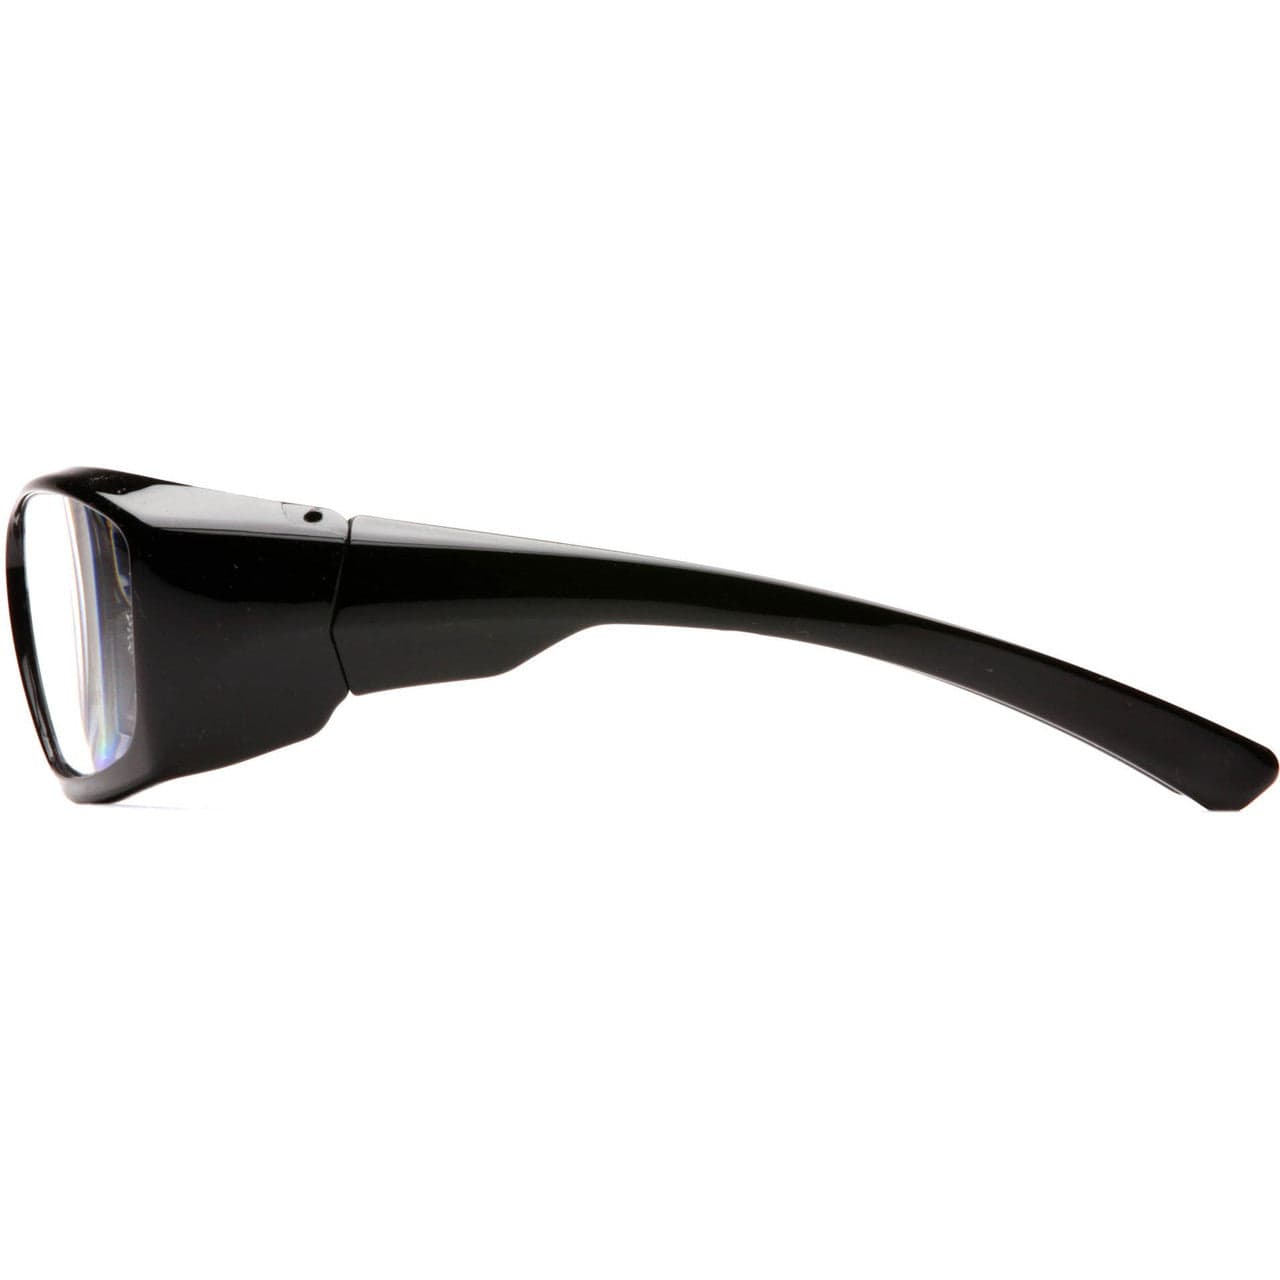 Pyramex Emerge Safety Glasses with Black Frame and Clear Full Magnifying Lens SB7910D Side View